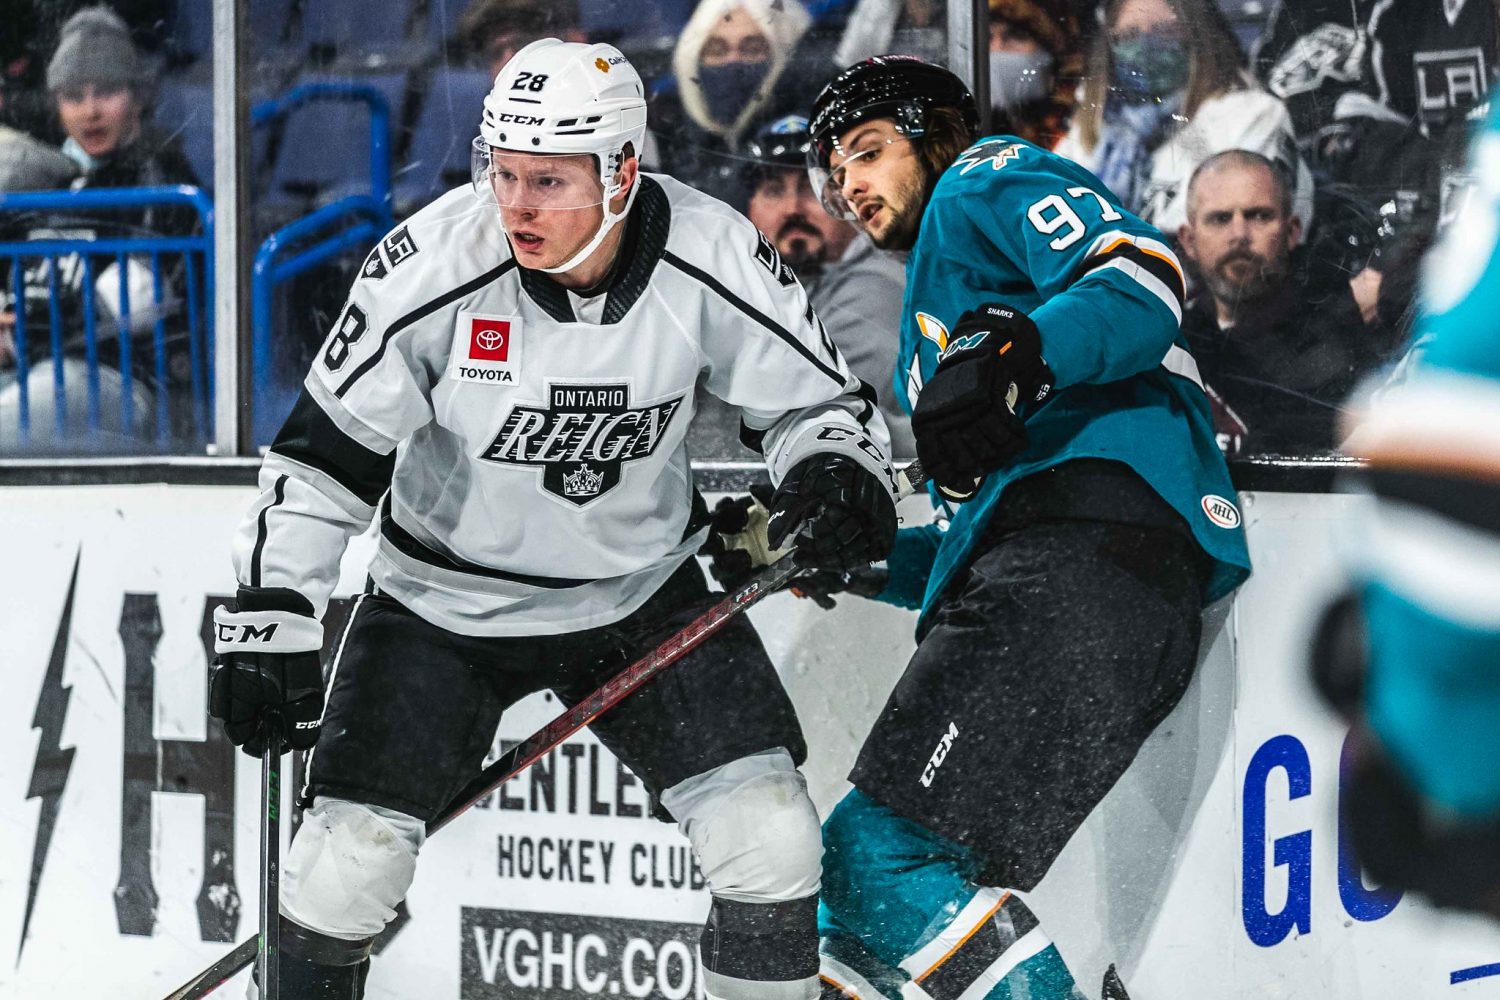 Recap of the Ontario Reign's 7-4 win over San Jose on Friday